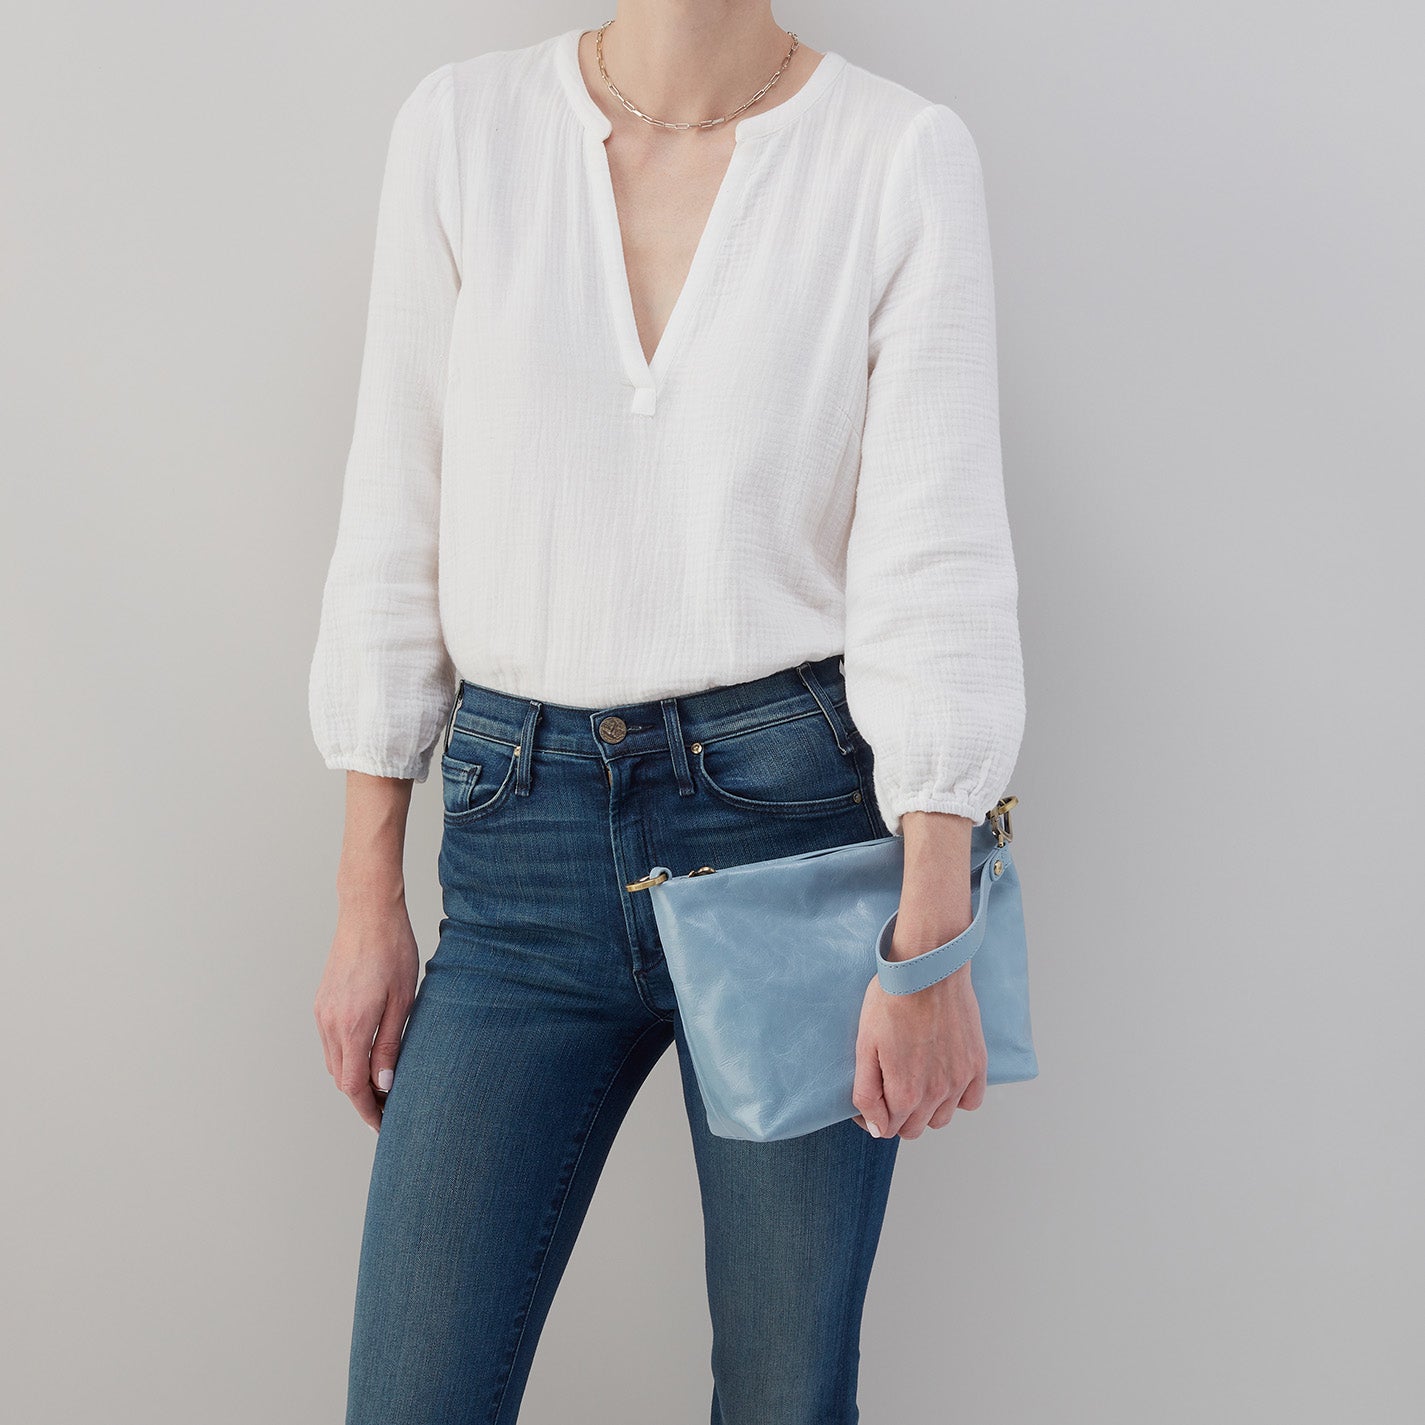 person wearing jeans and a white top holding cornflower Ashe Crossbody as a clutch.